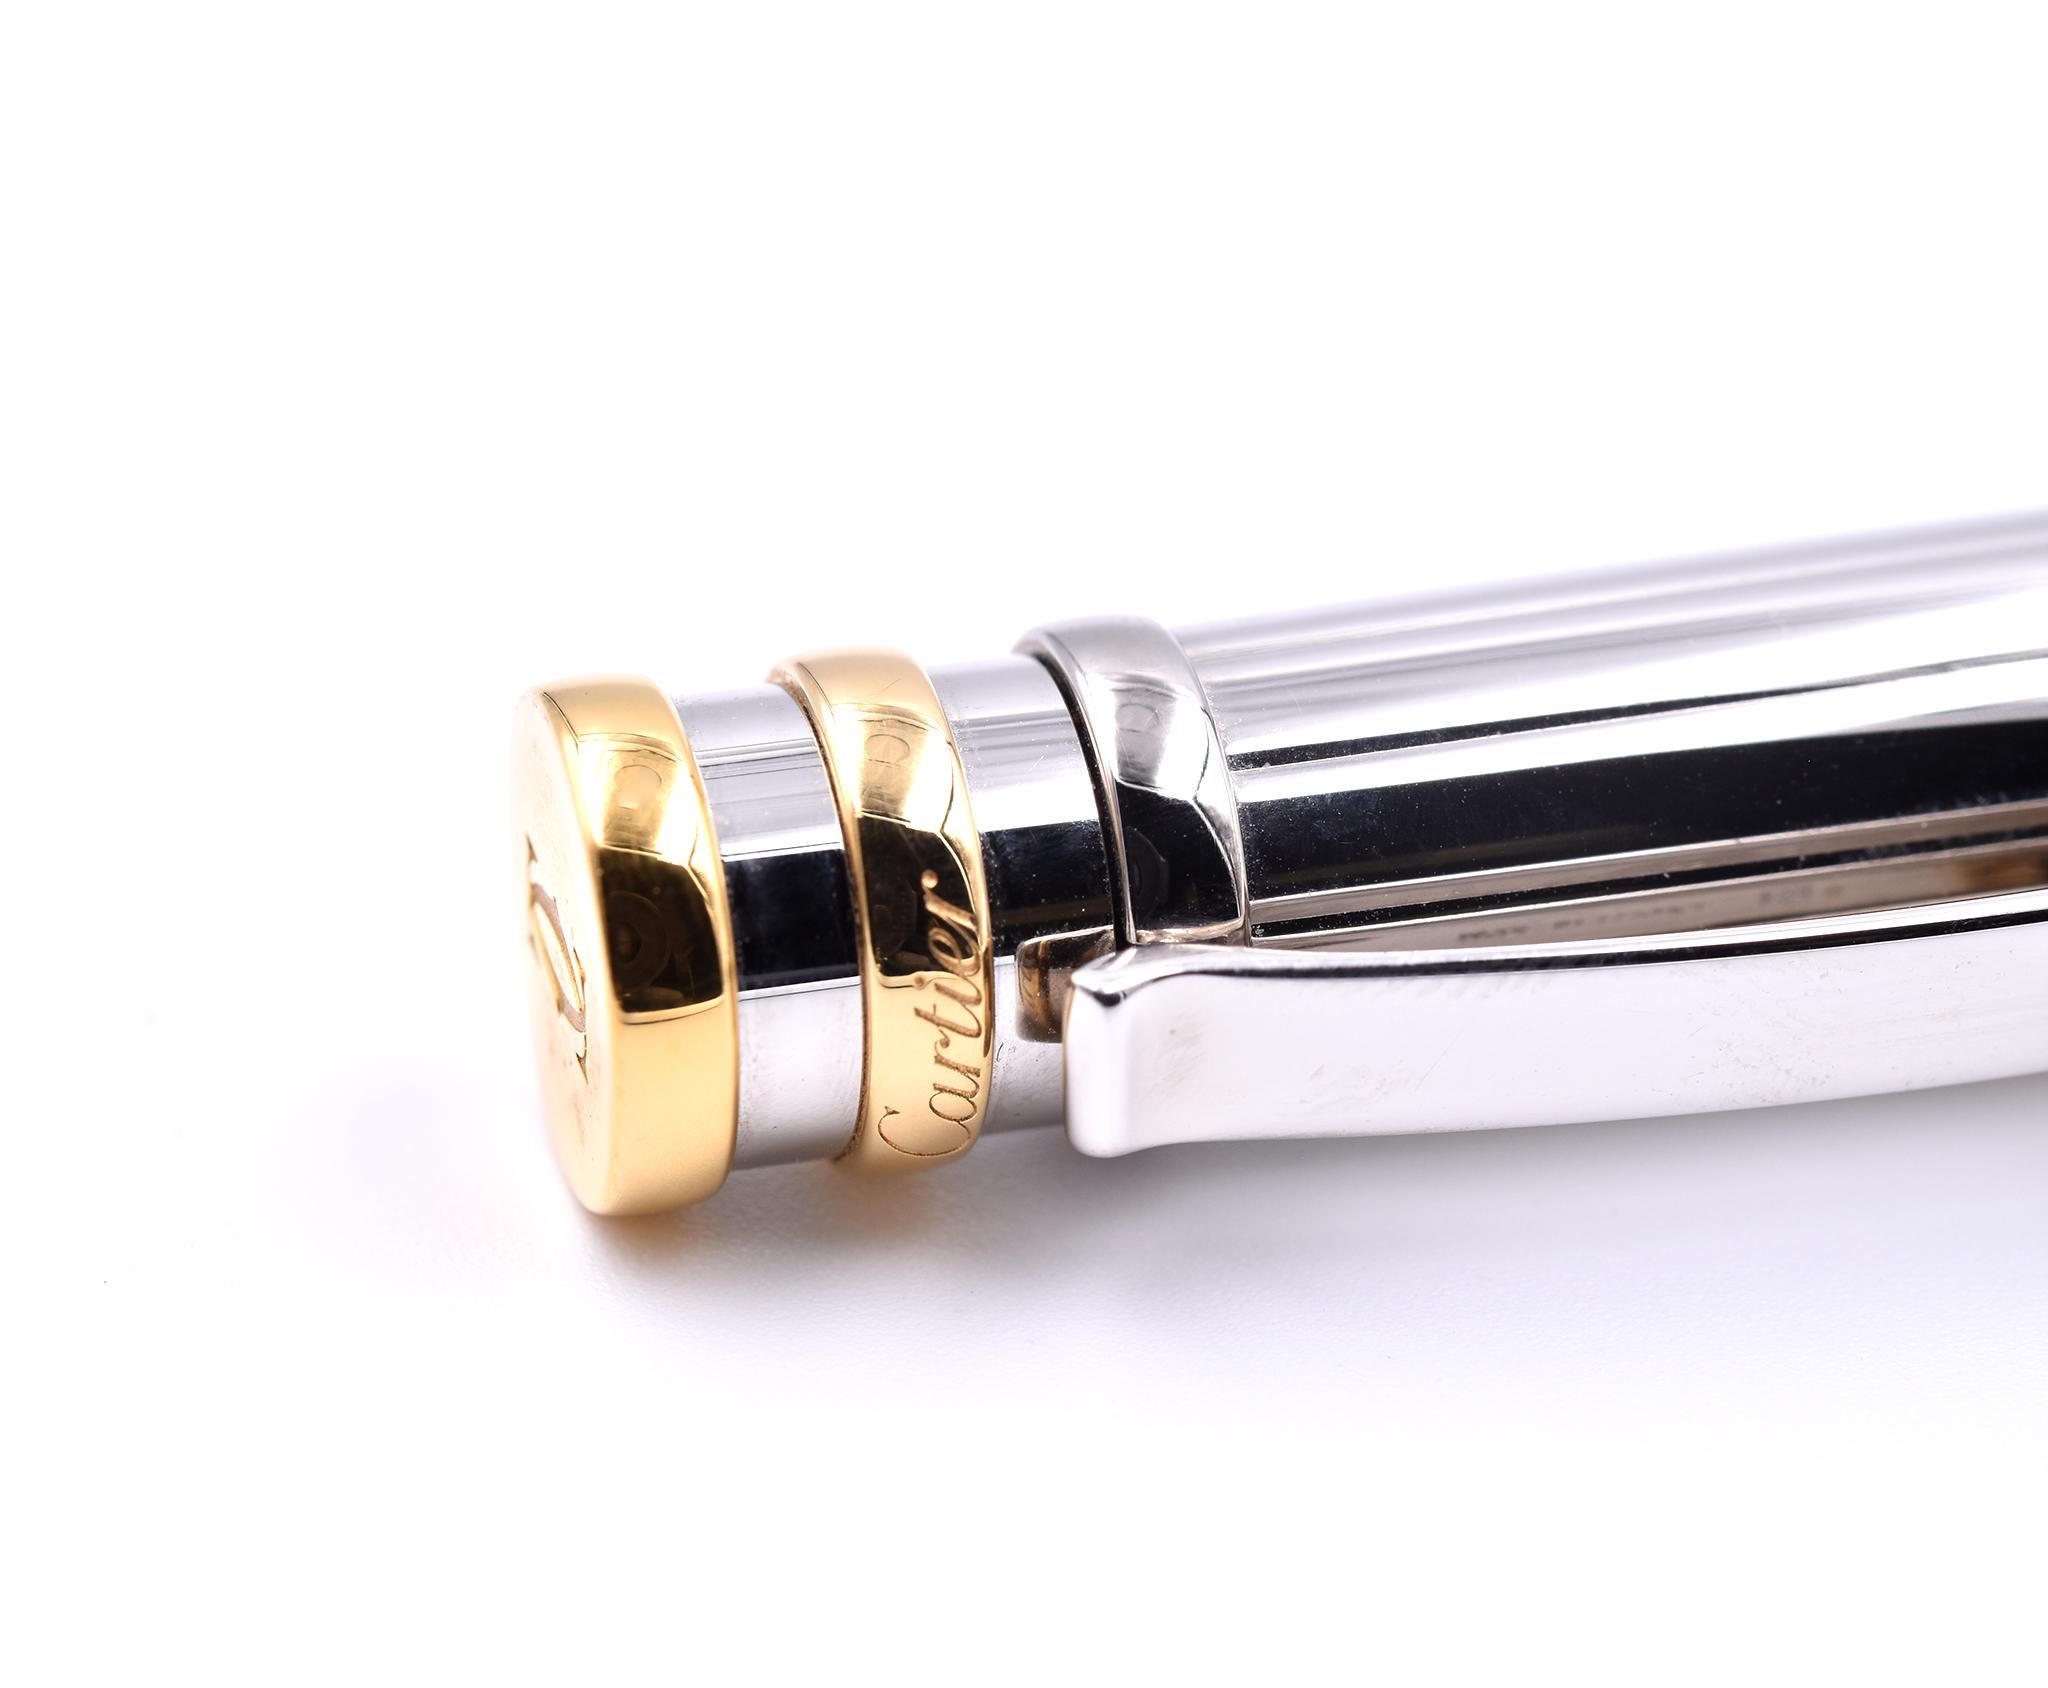 Designer: Cartier
Material: Palladium
Dimensions: pen measures 5” in length
Weight: 38.32 grams
Serial: 006034

Comes with official box.
